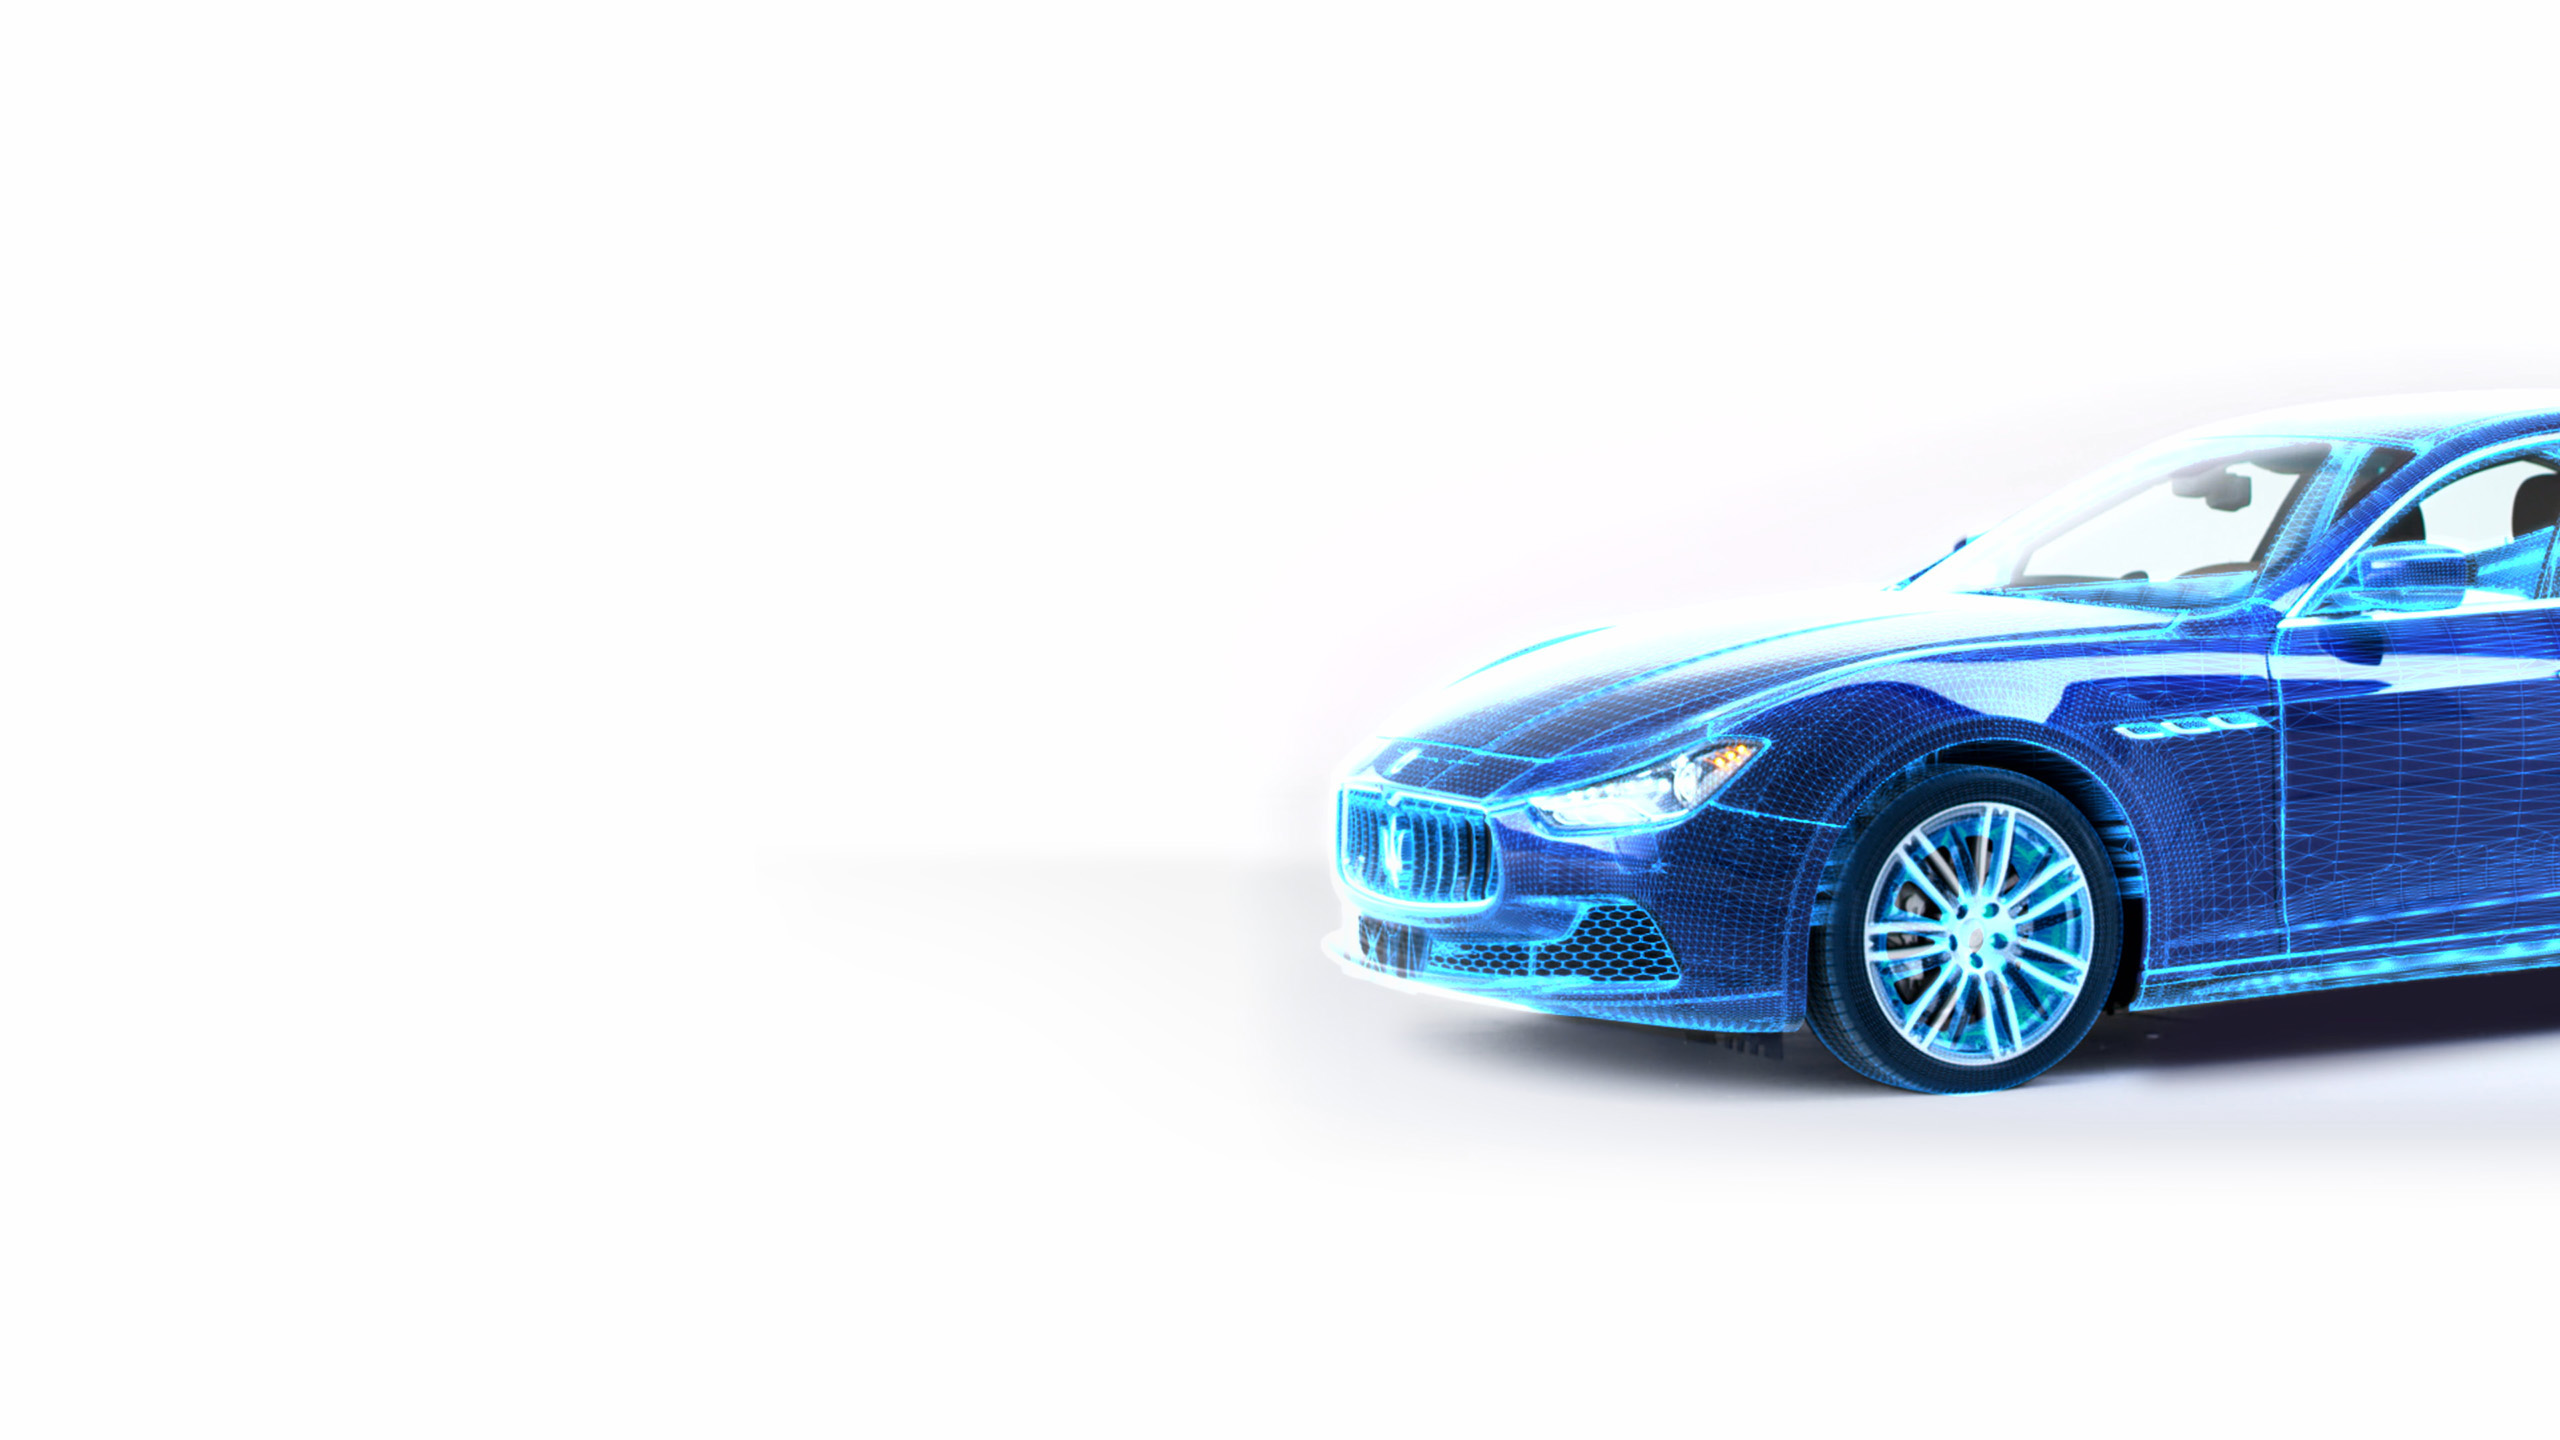 Maserati worked with holistic manufacturing solutions, choosing Siemens as a partner.